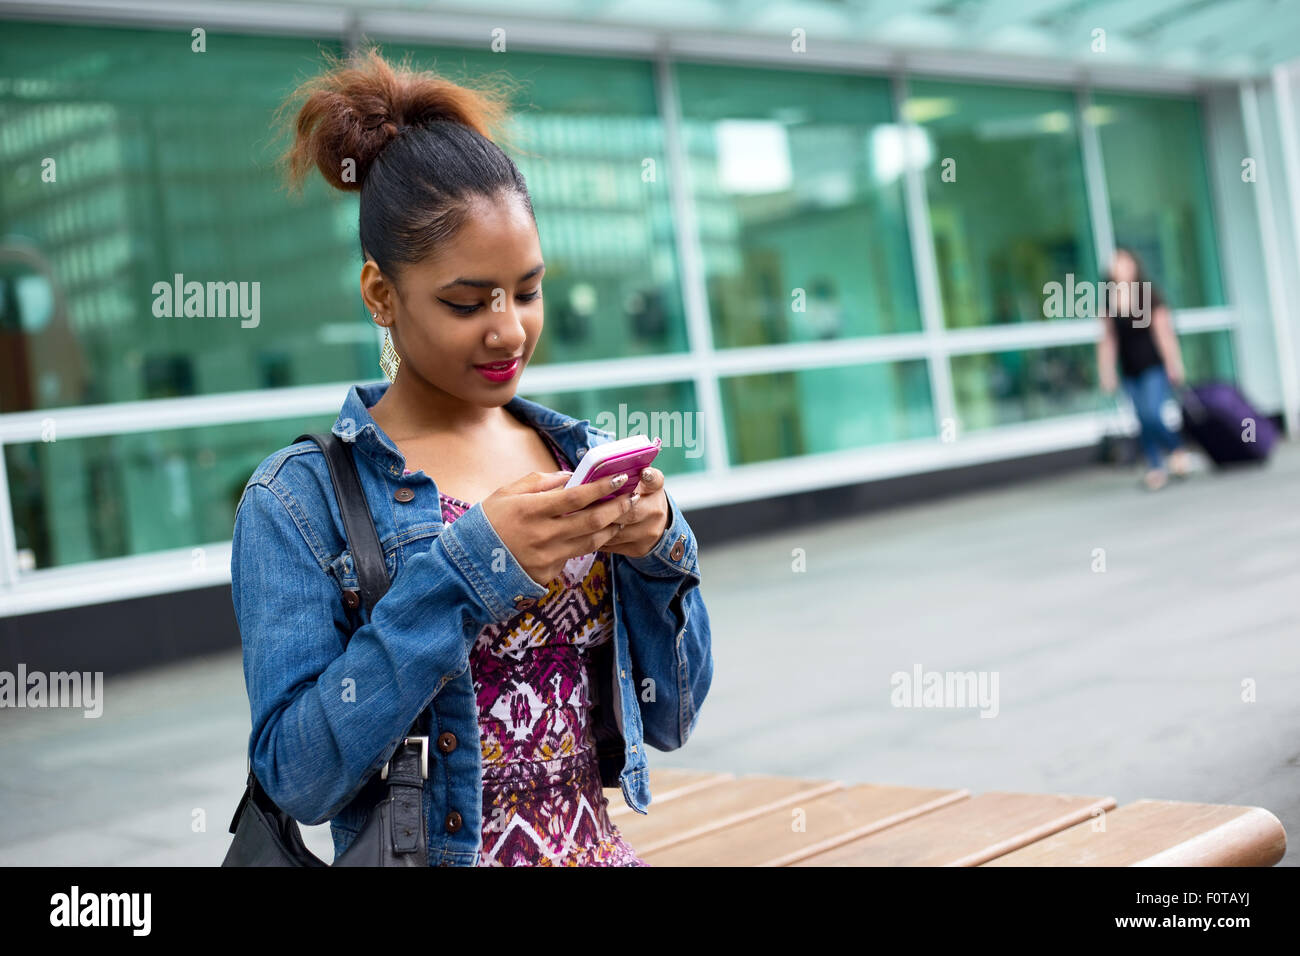 young woman sitting on a bench sending a text message Stock Photo